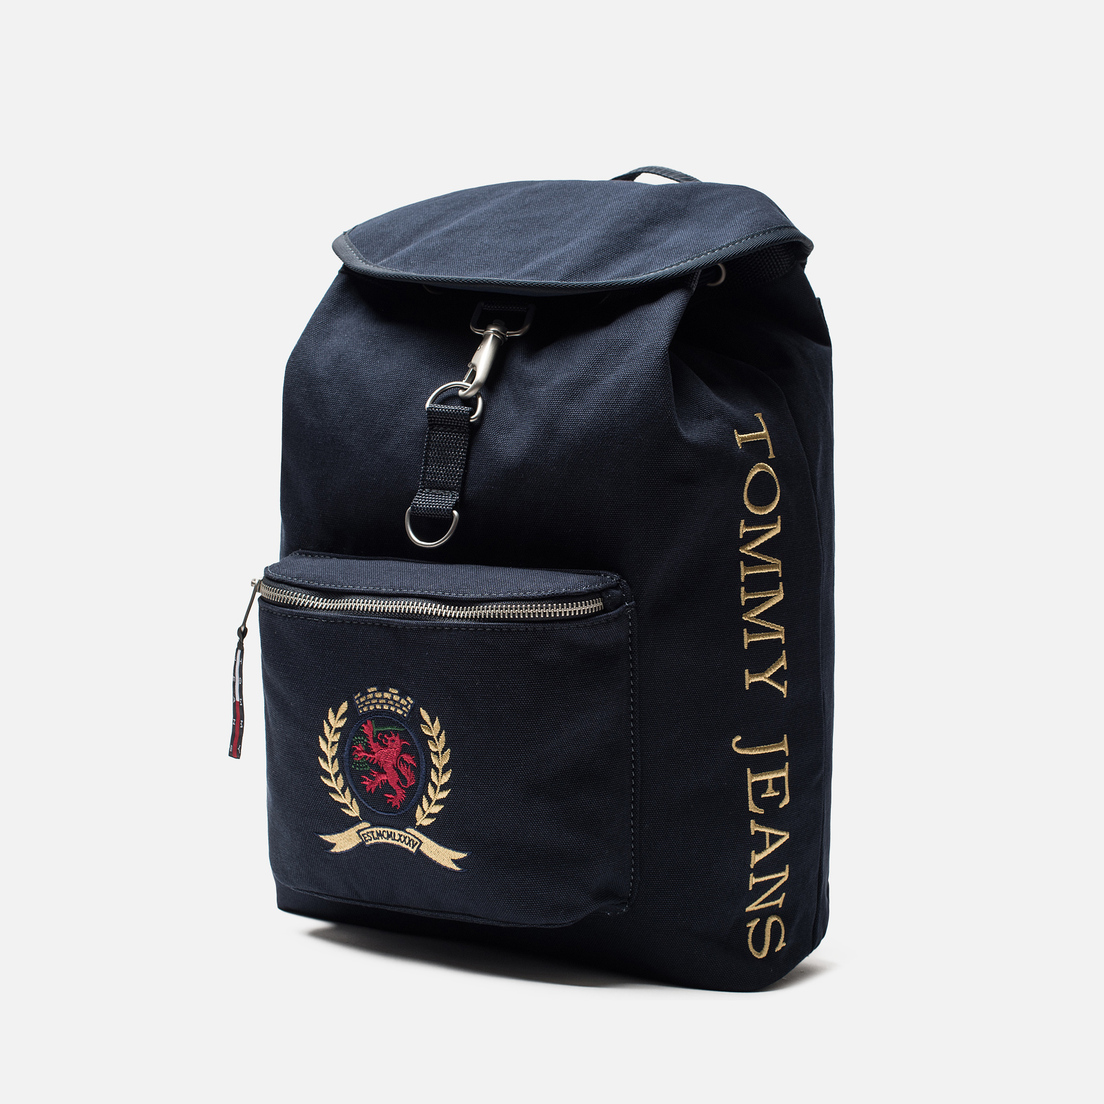 Tommy Jeans Рюкзак Crest Heritage